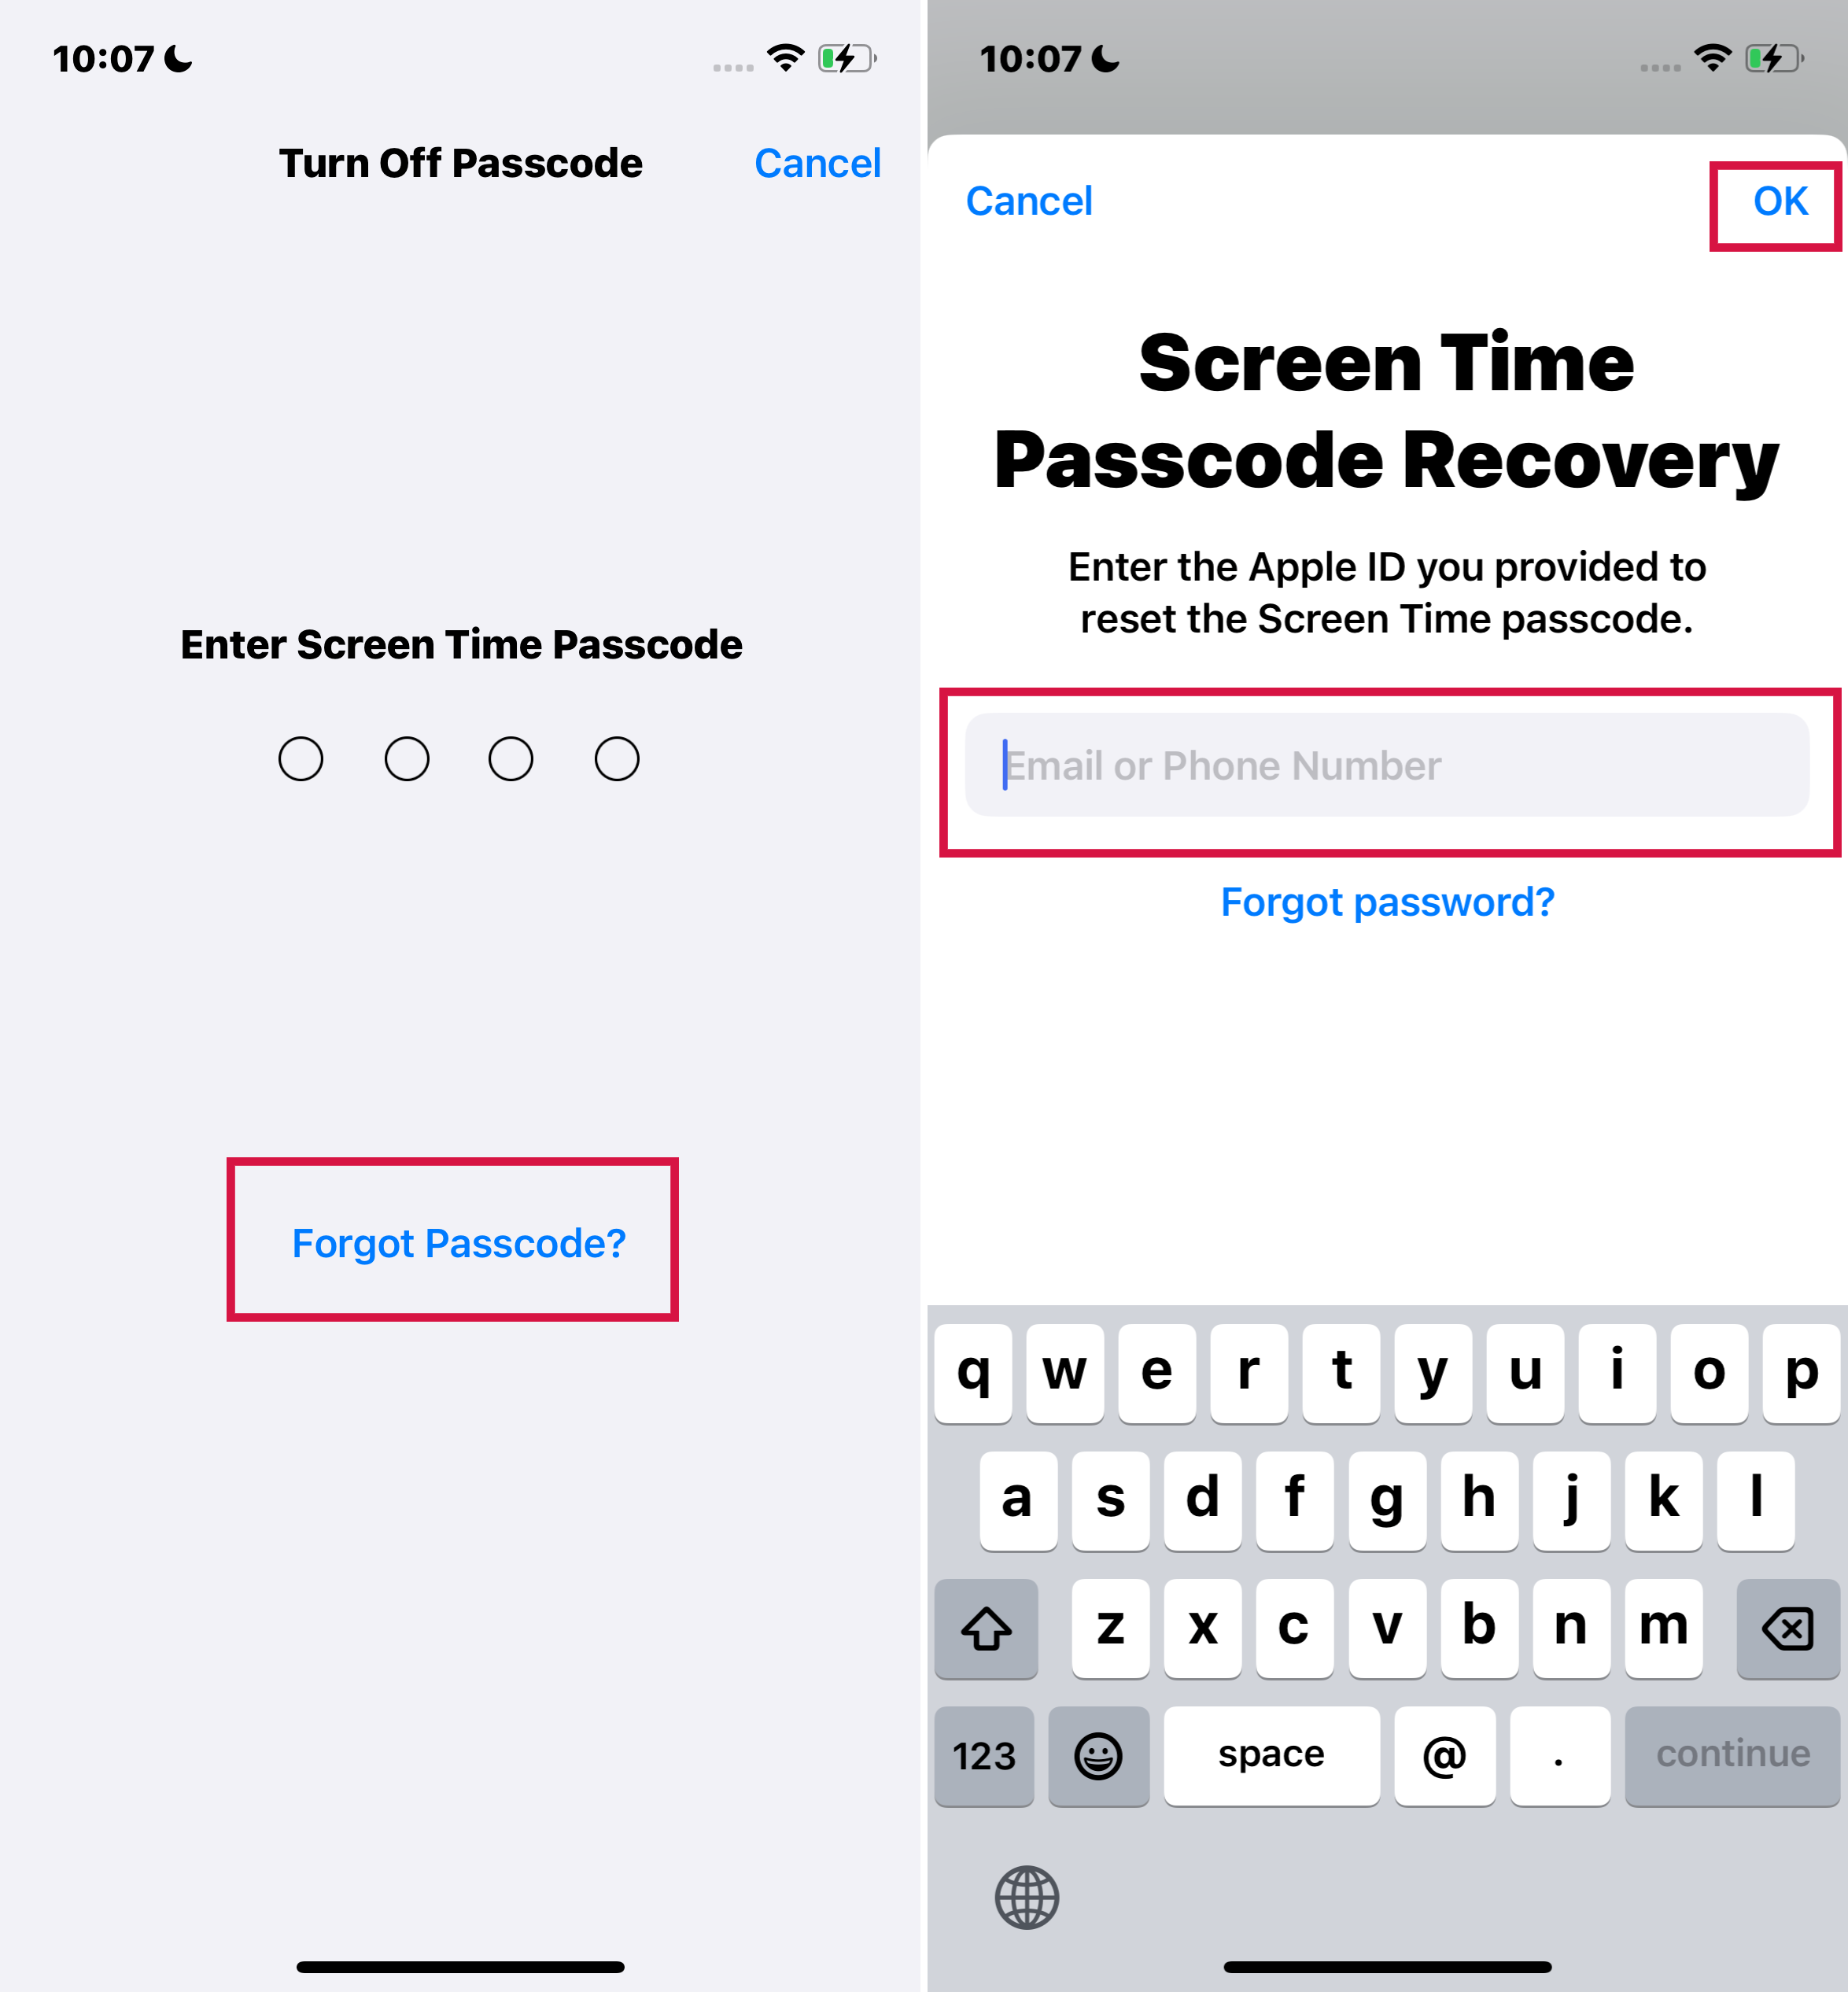 Reset Screen Time Passcode via Screen Time Passcode Recovery